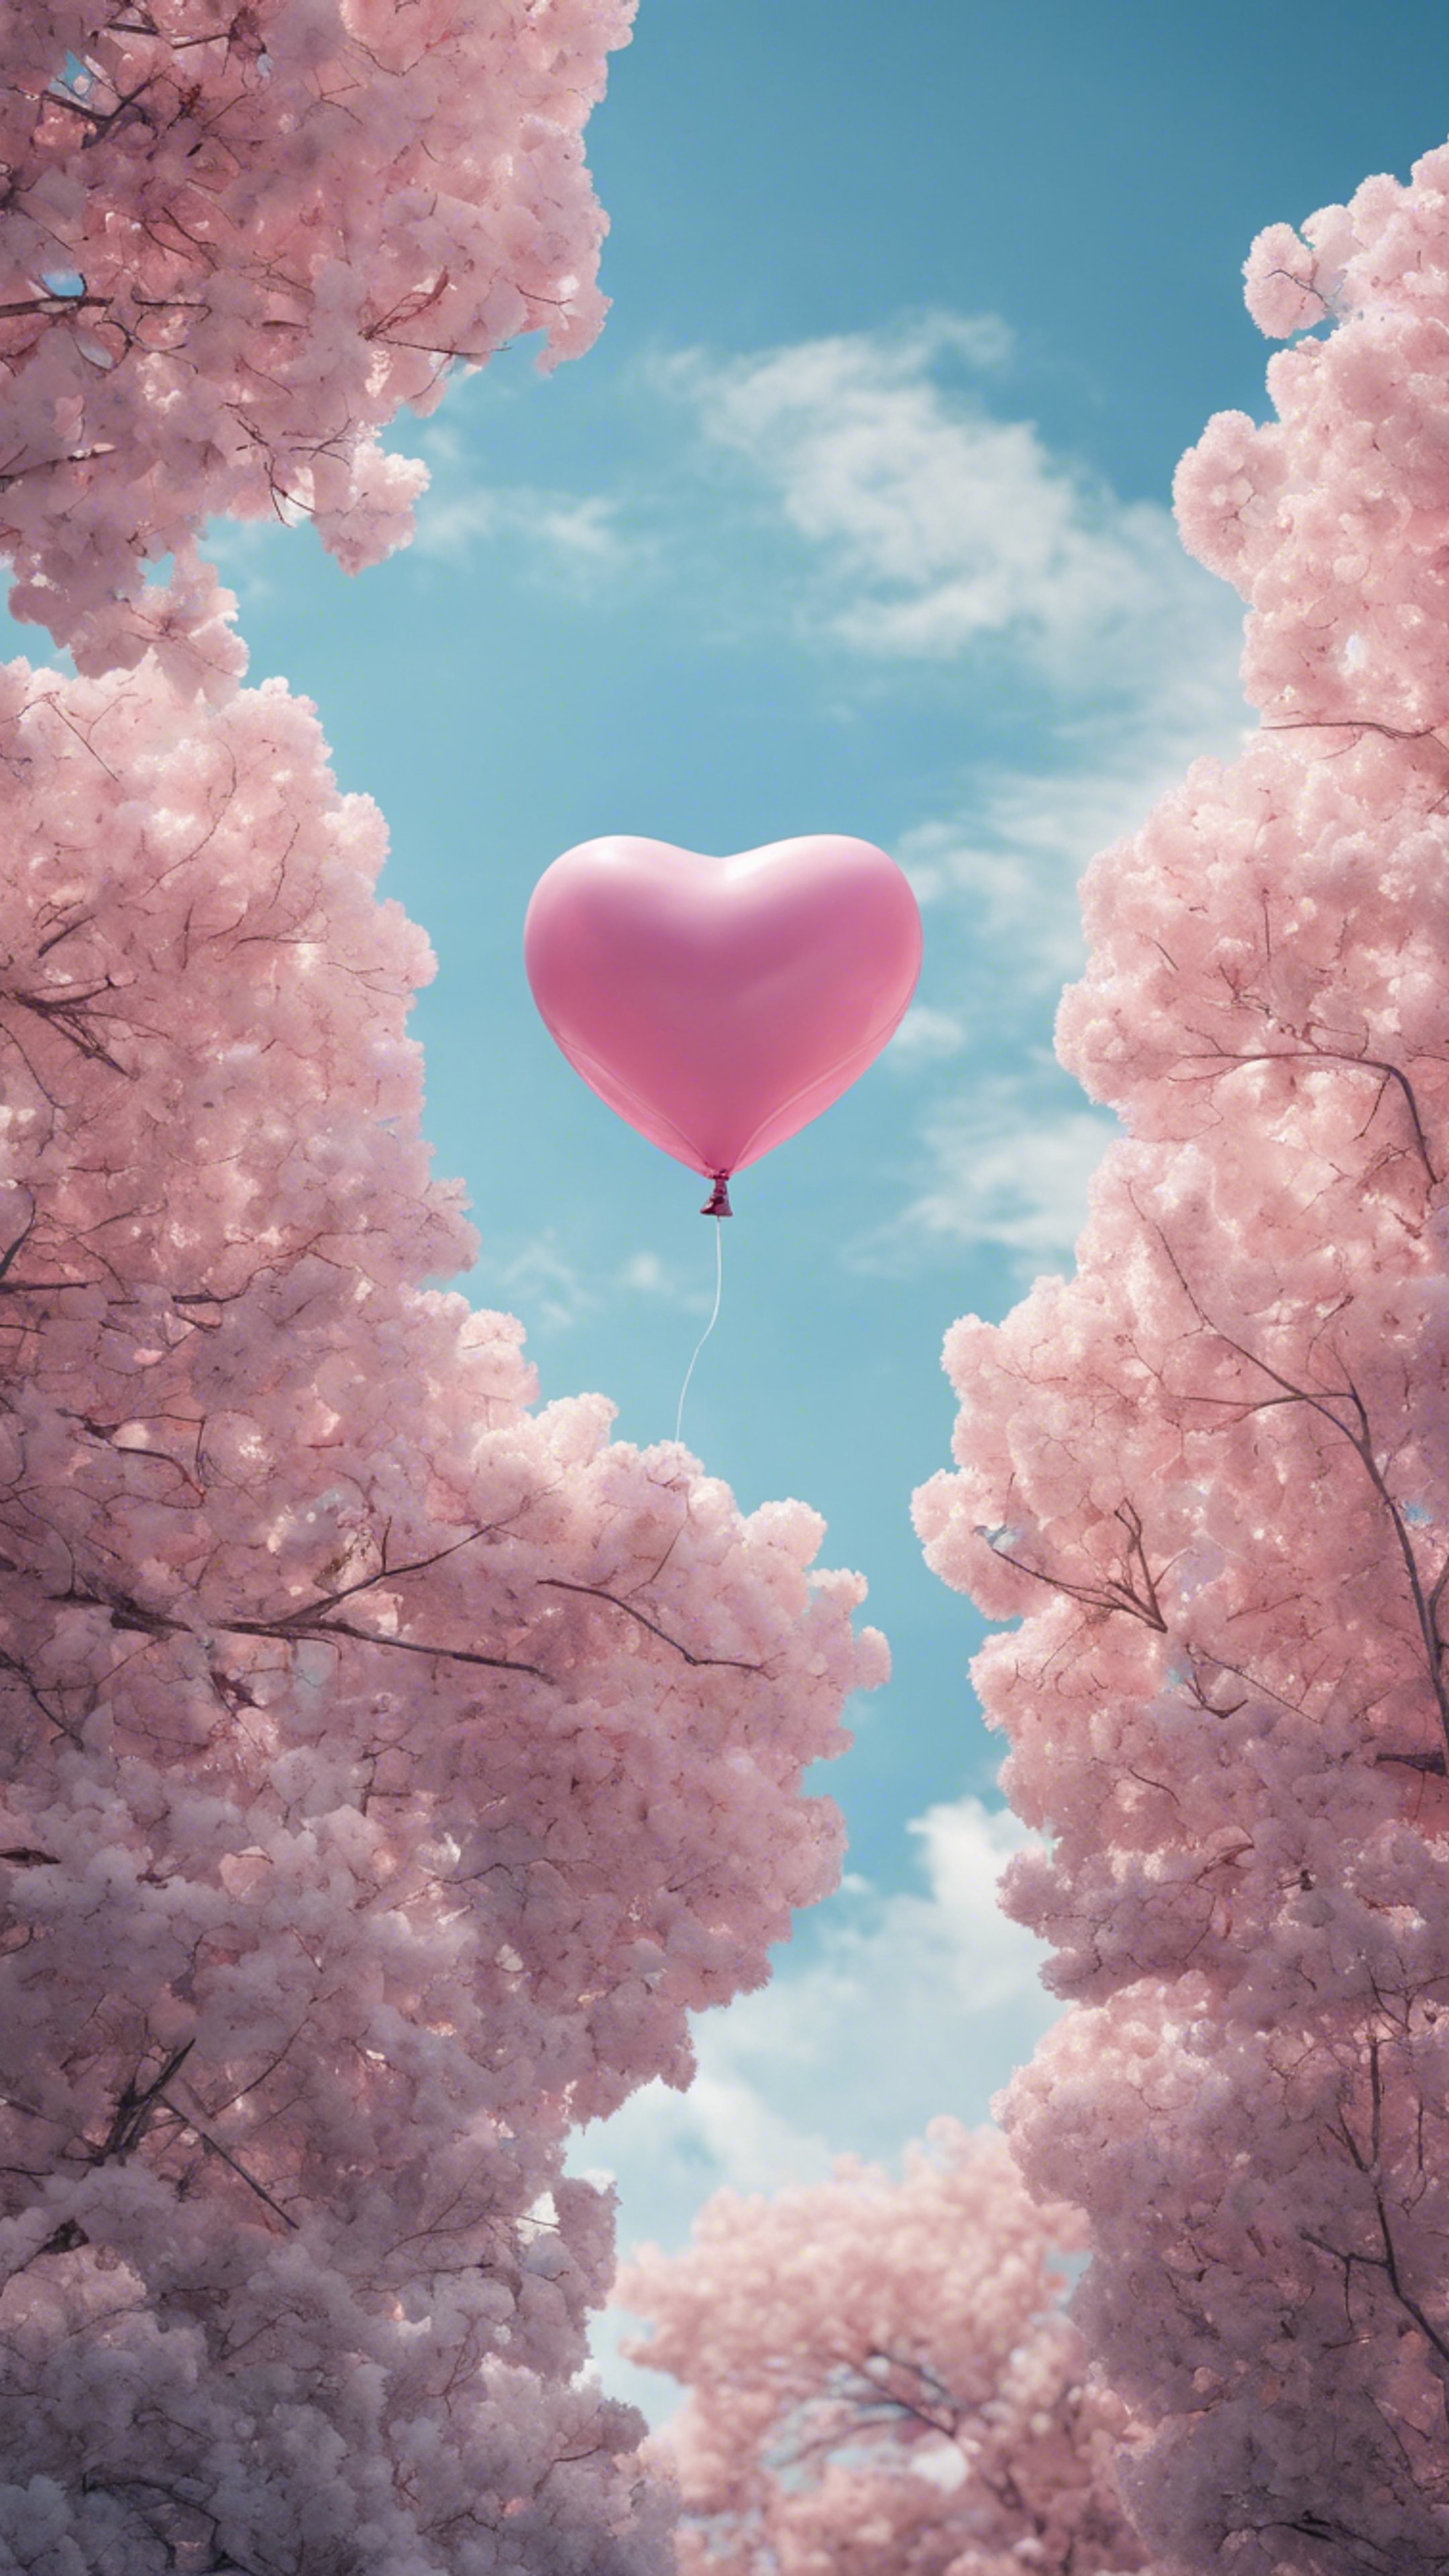 A pink heart-shaped balloon floating in the blue sky. Kertas dinding[cd7c71404dc64bc7bb7c]